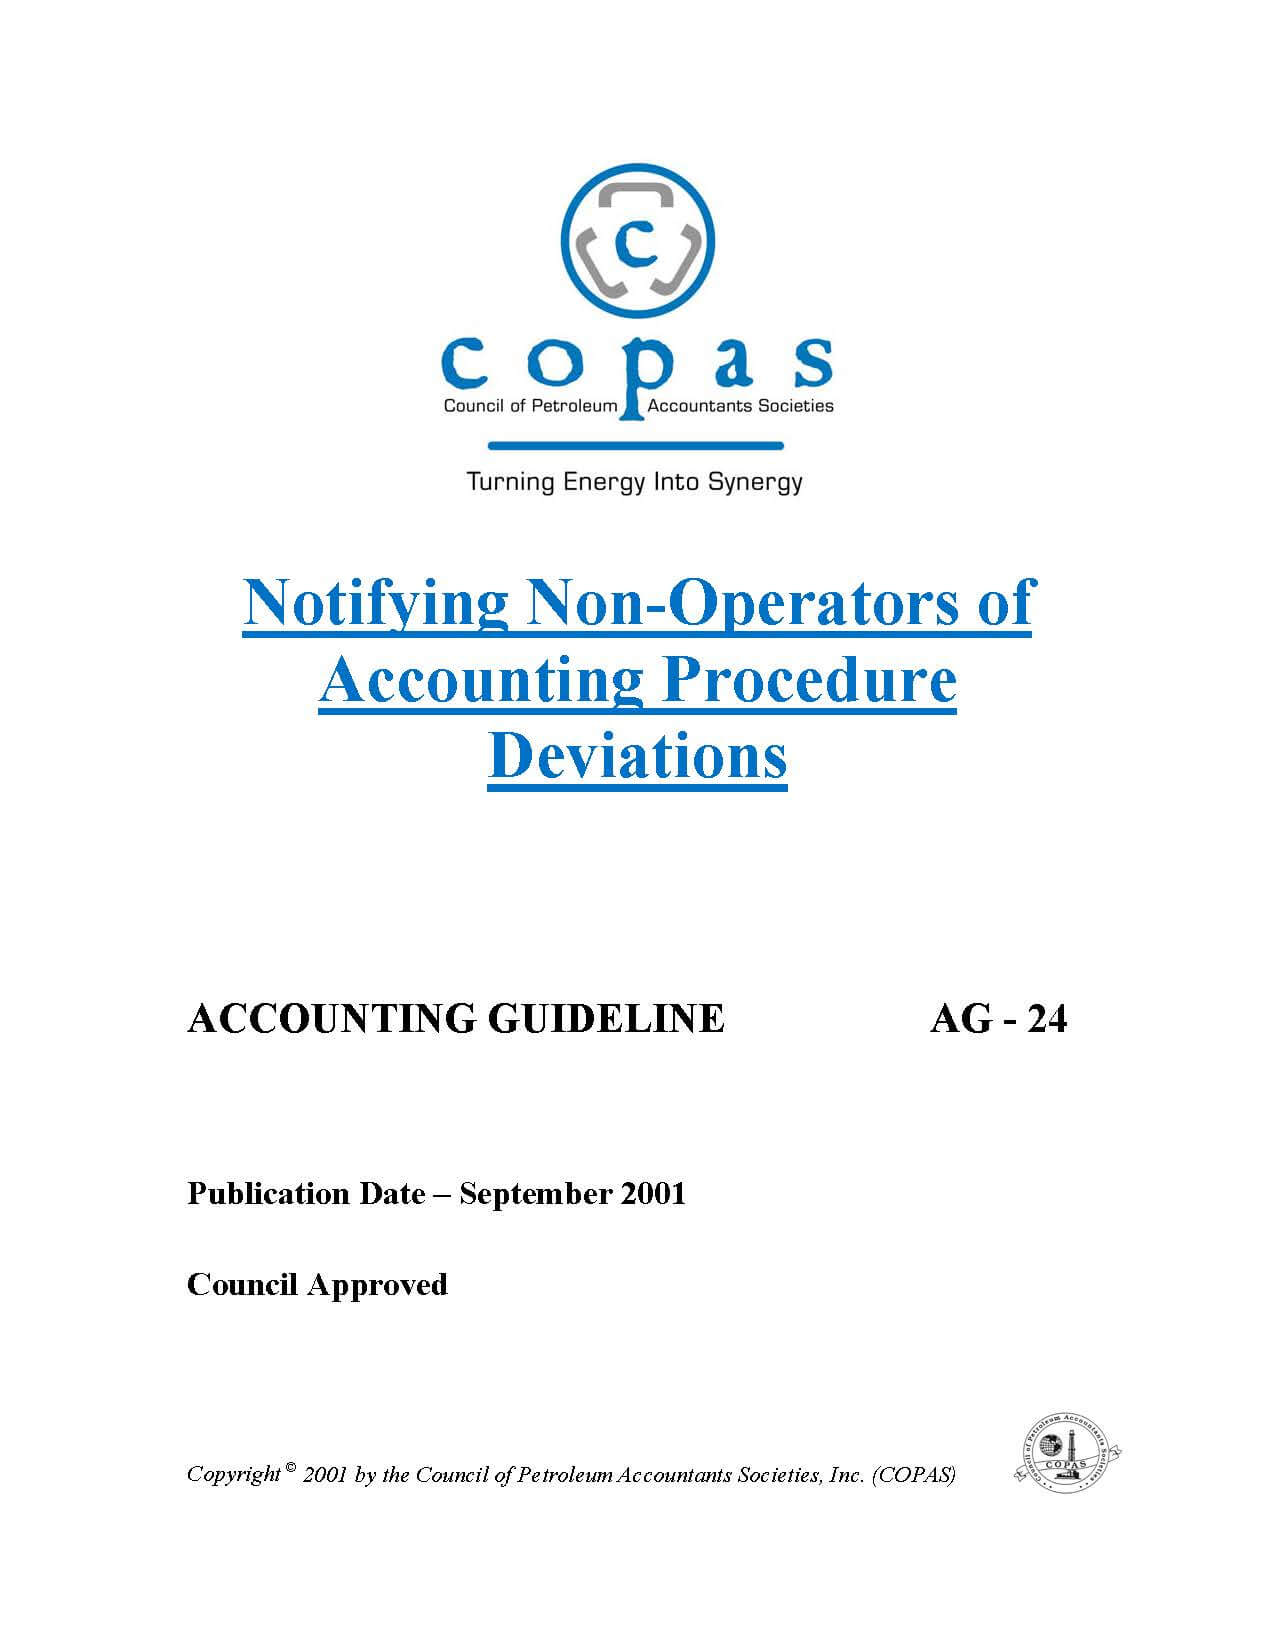 AG-24 Notifying Non Operators of Accounting Procedure Deviations - products AG 24 Notifying Non Operators of Accounting Procedure Deviations - Council of Petroleum Accountants Societies